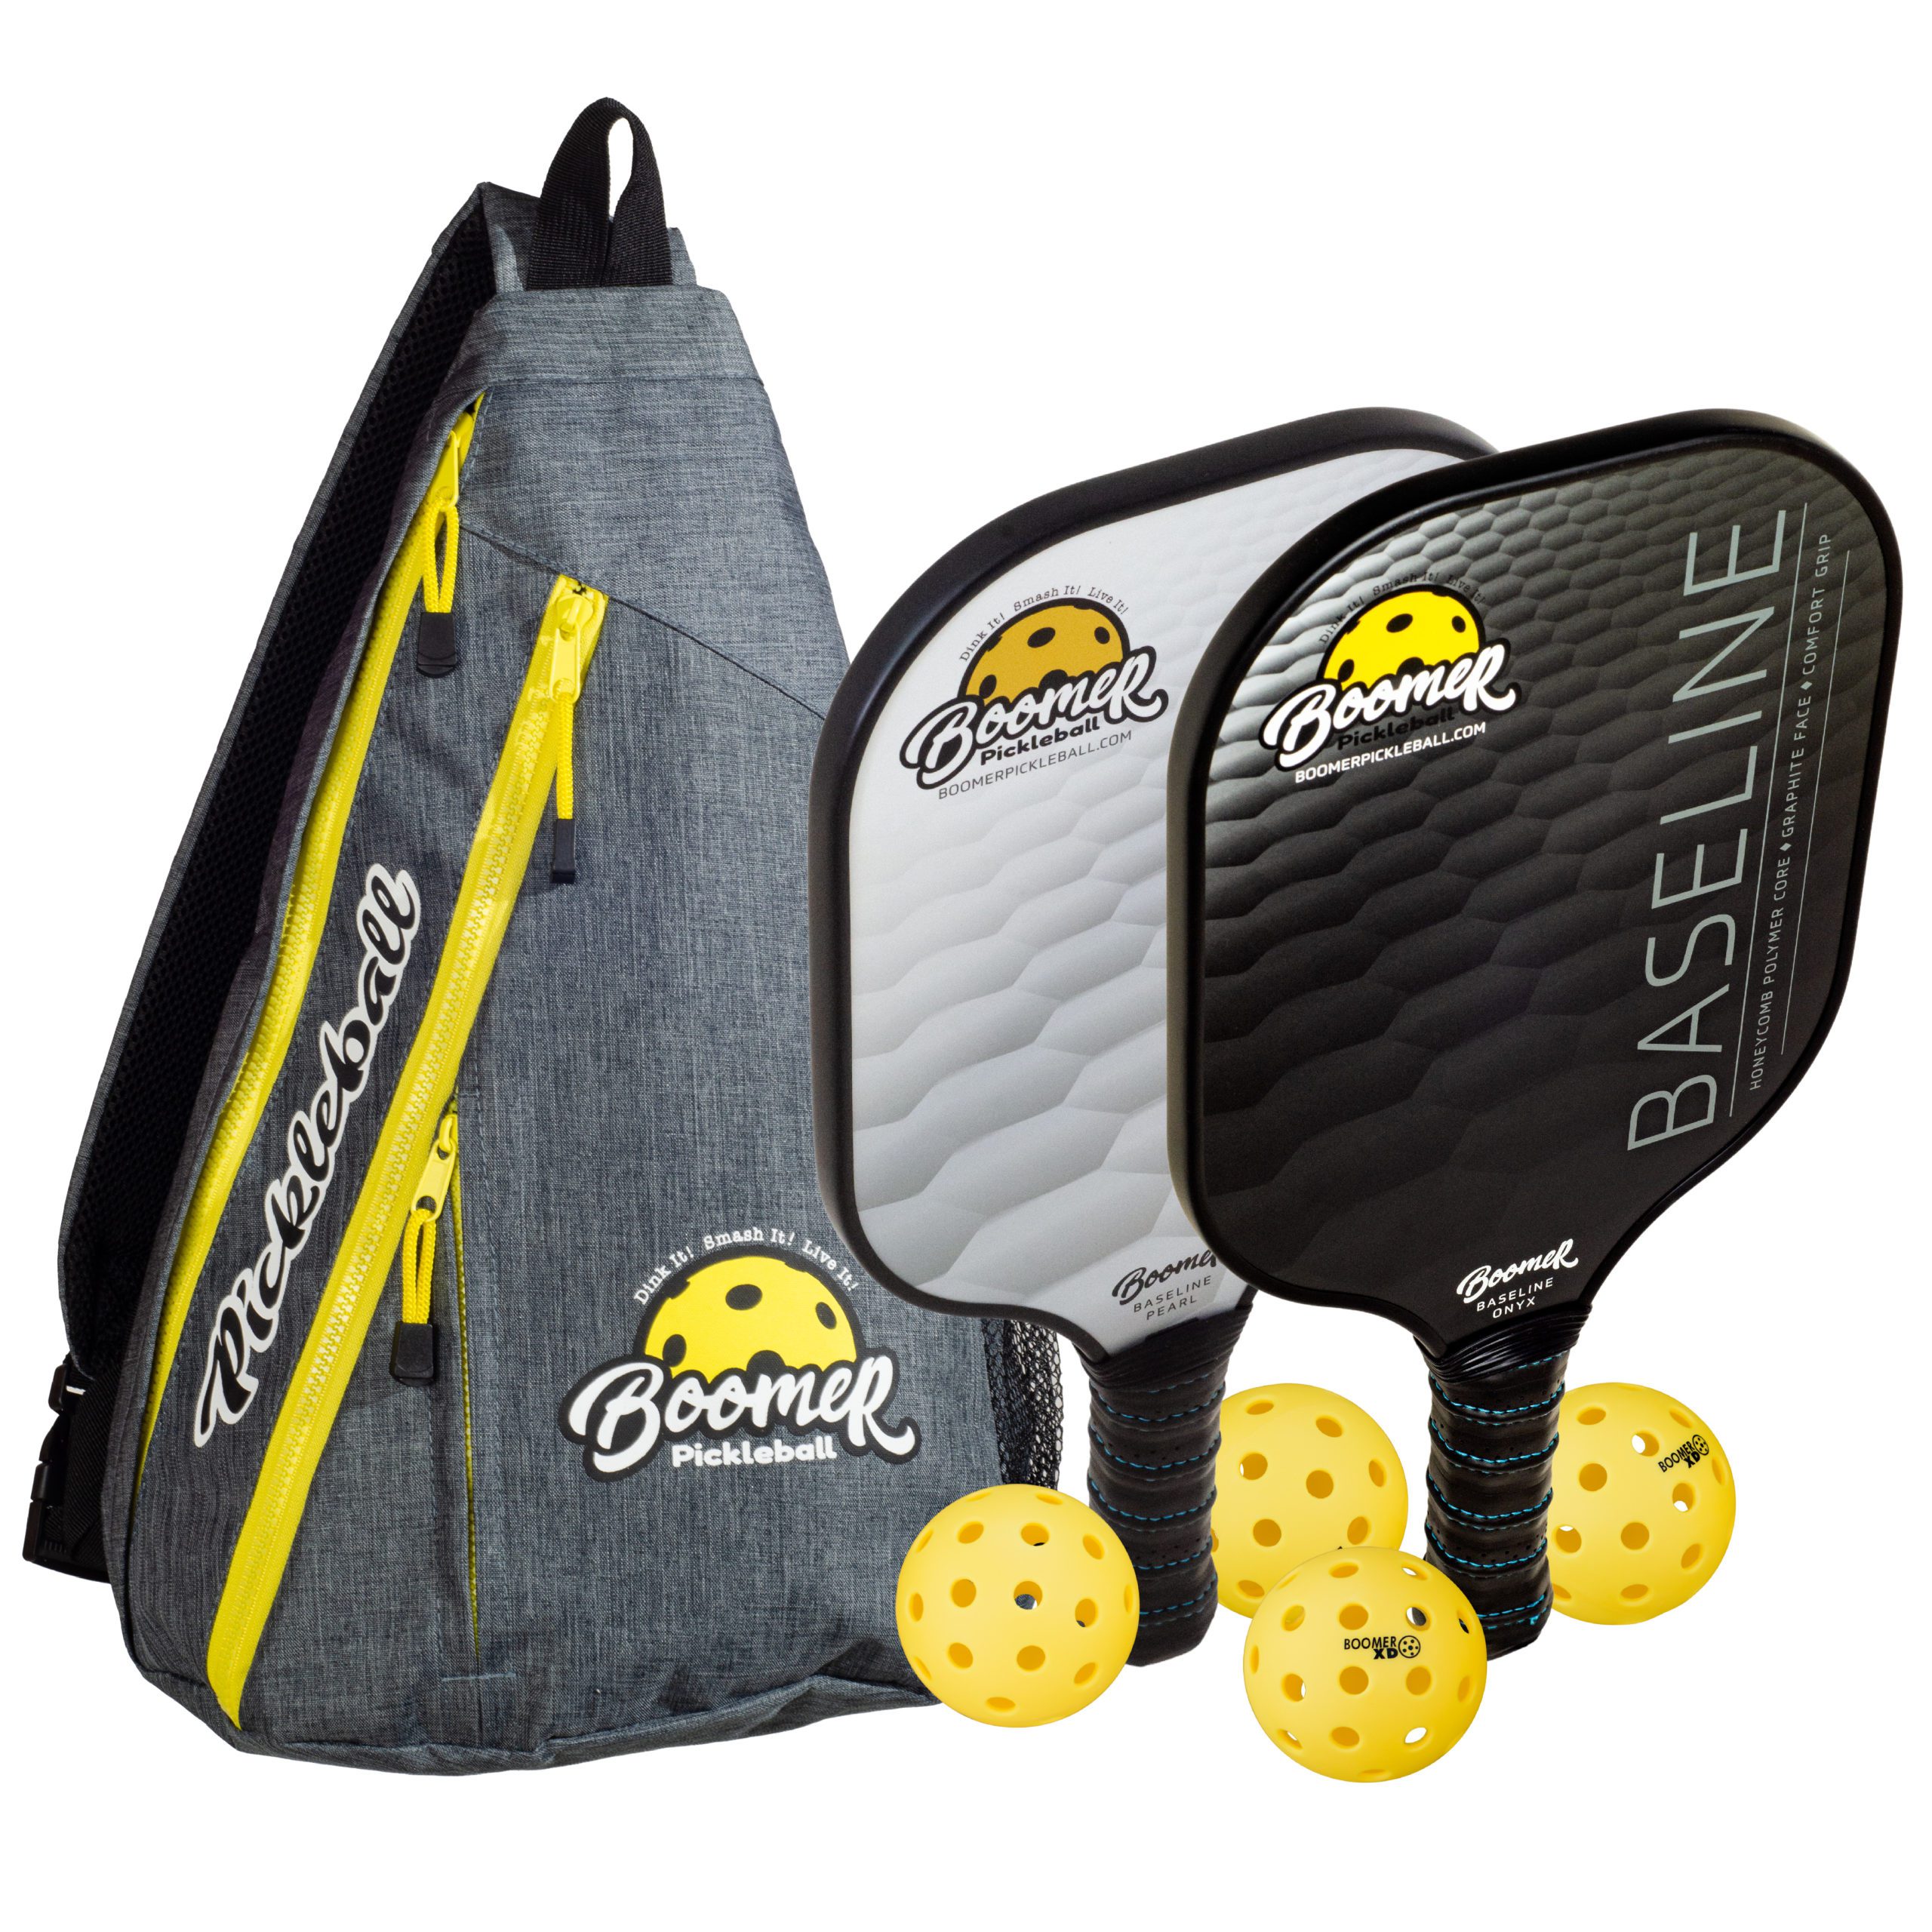 Boomer Baseline Paddles, Balls, and Sling Bags